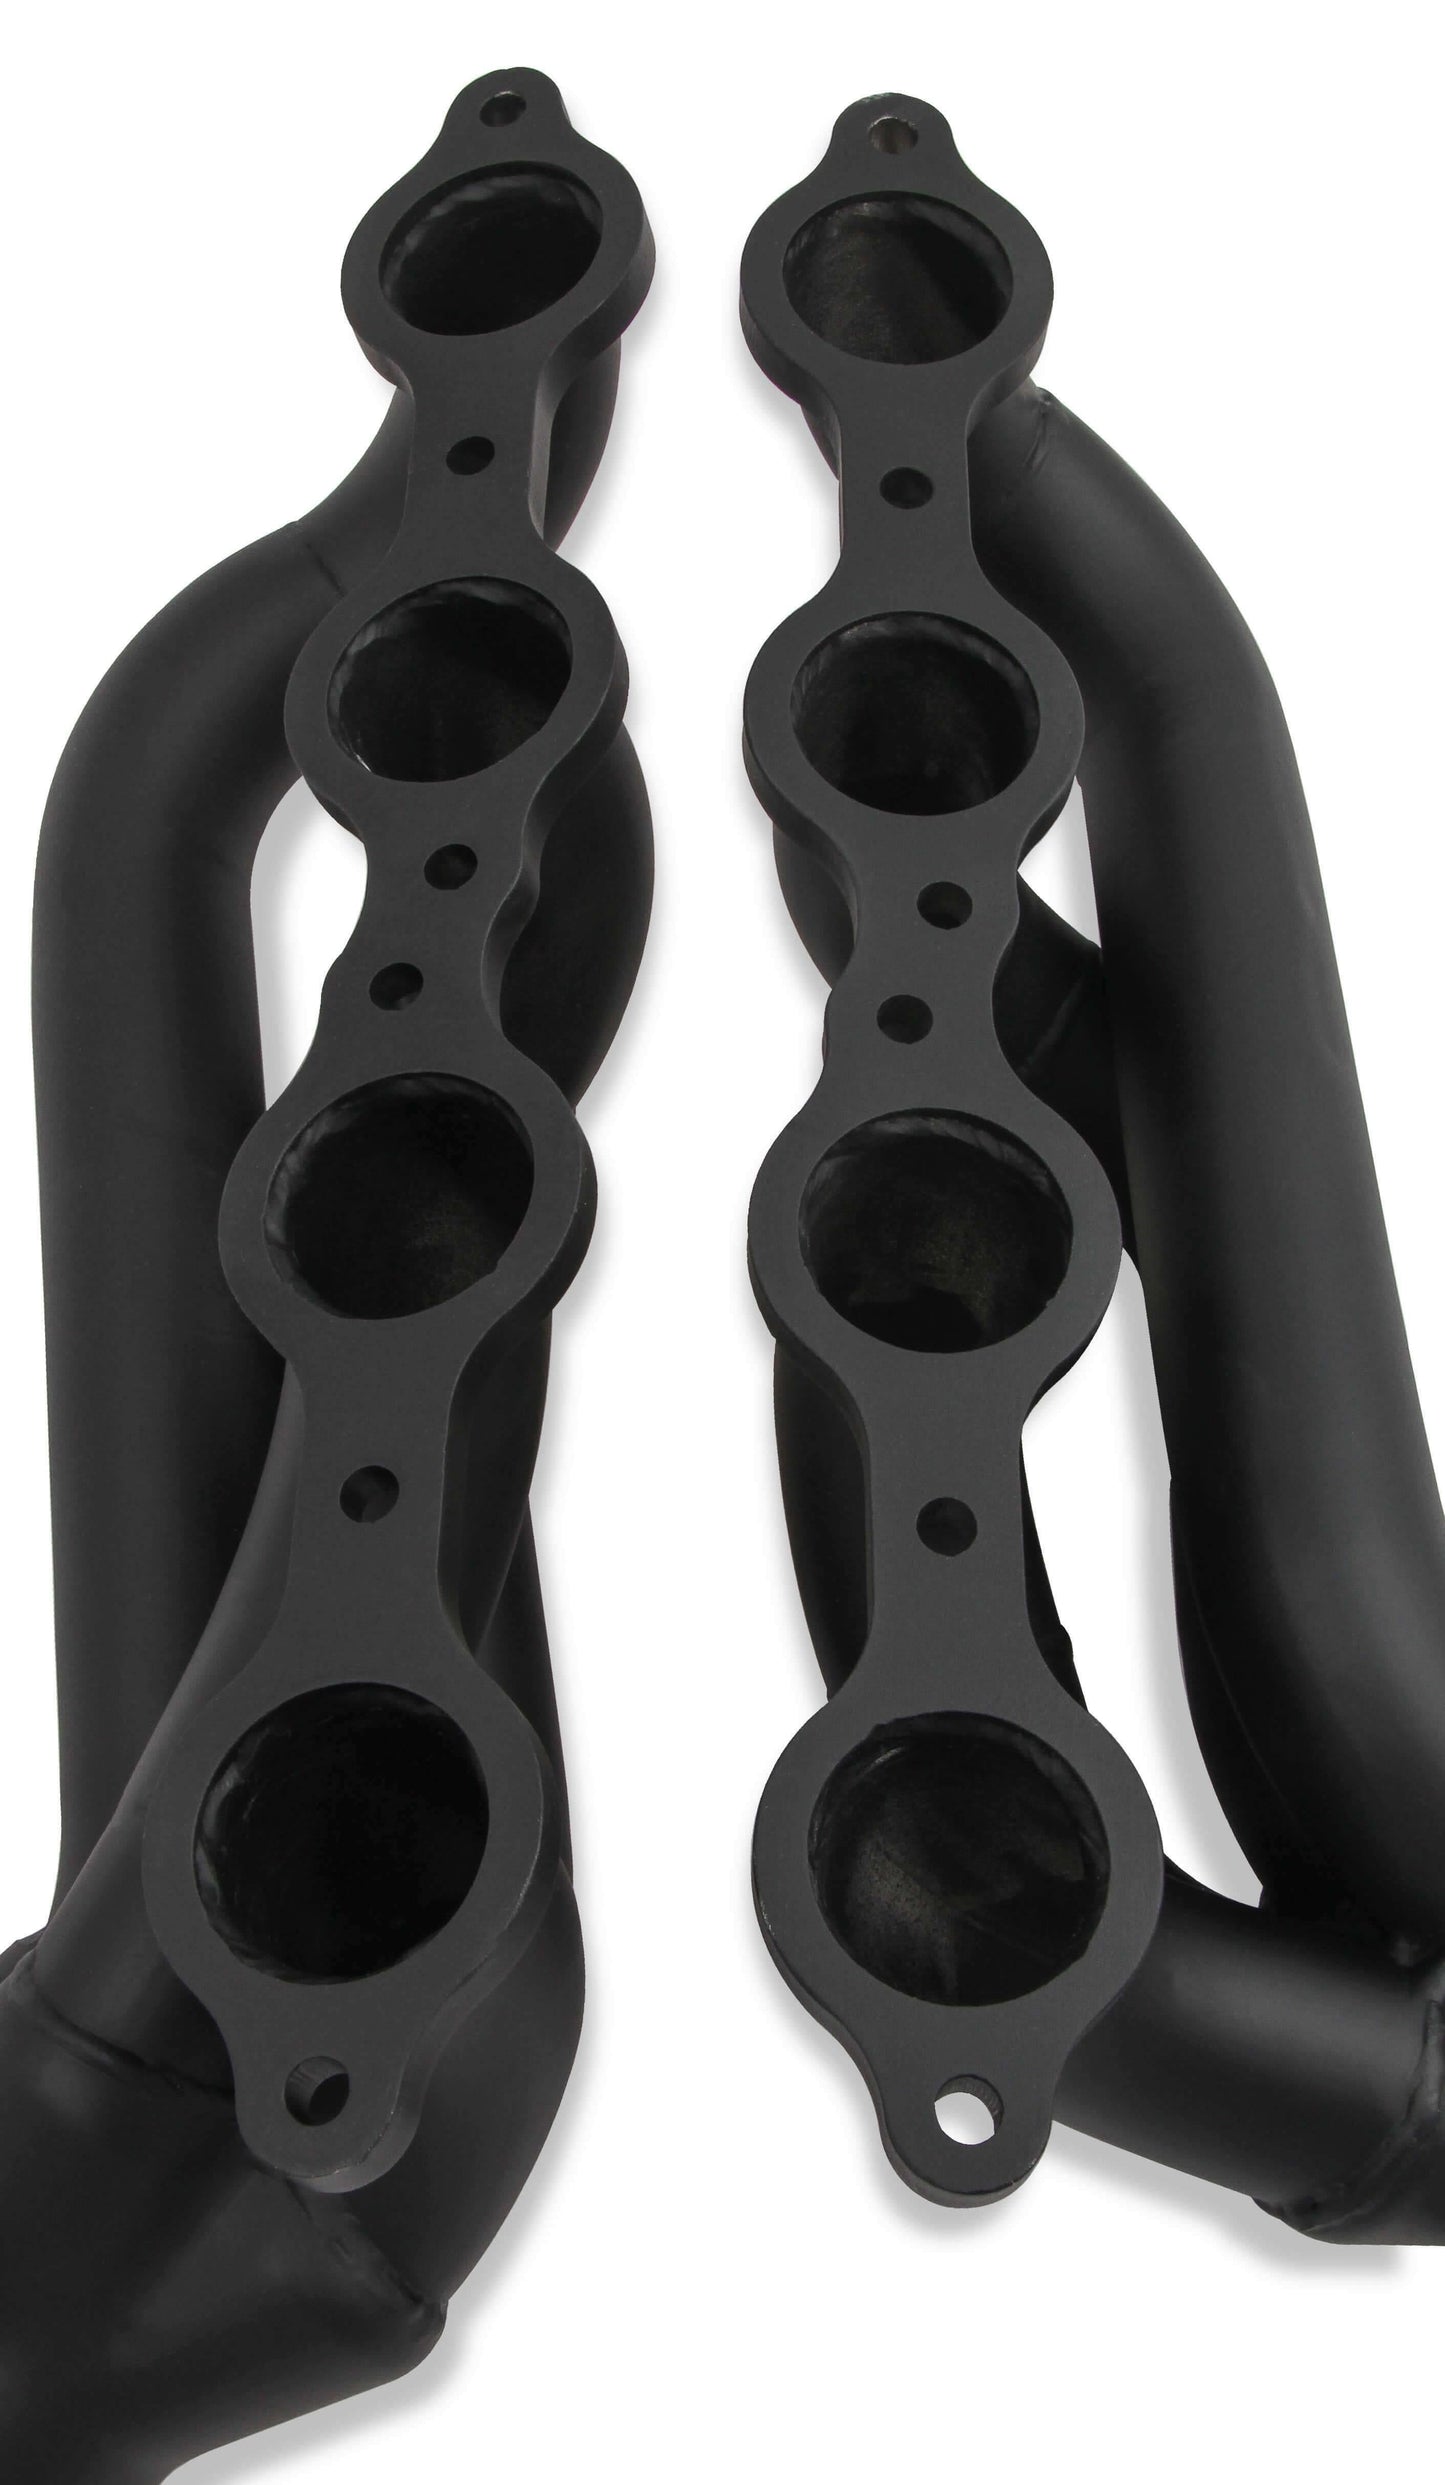 Flowtech 11143FLT - Shorty Headers - Black Painted - 2WD/4WD equipped with 6.0L LS V8 Engine